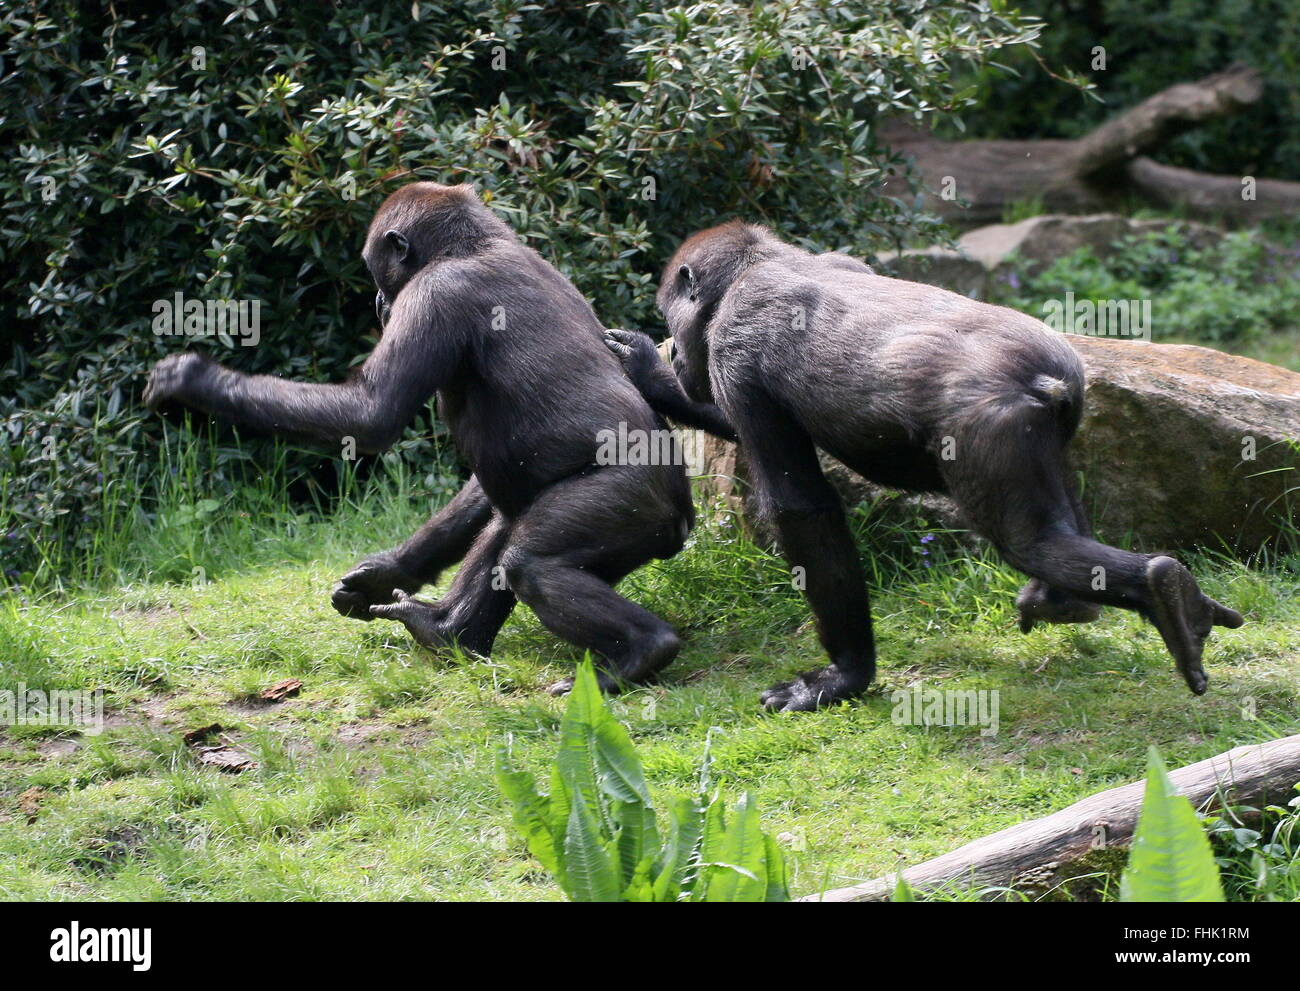 Mischievous young male Western lowland gorilla chasing his older sibling Stock Photo